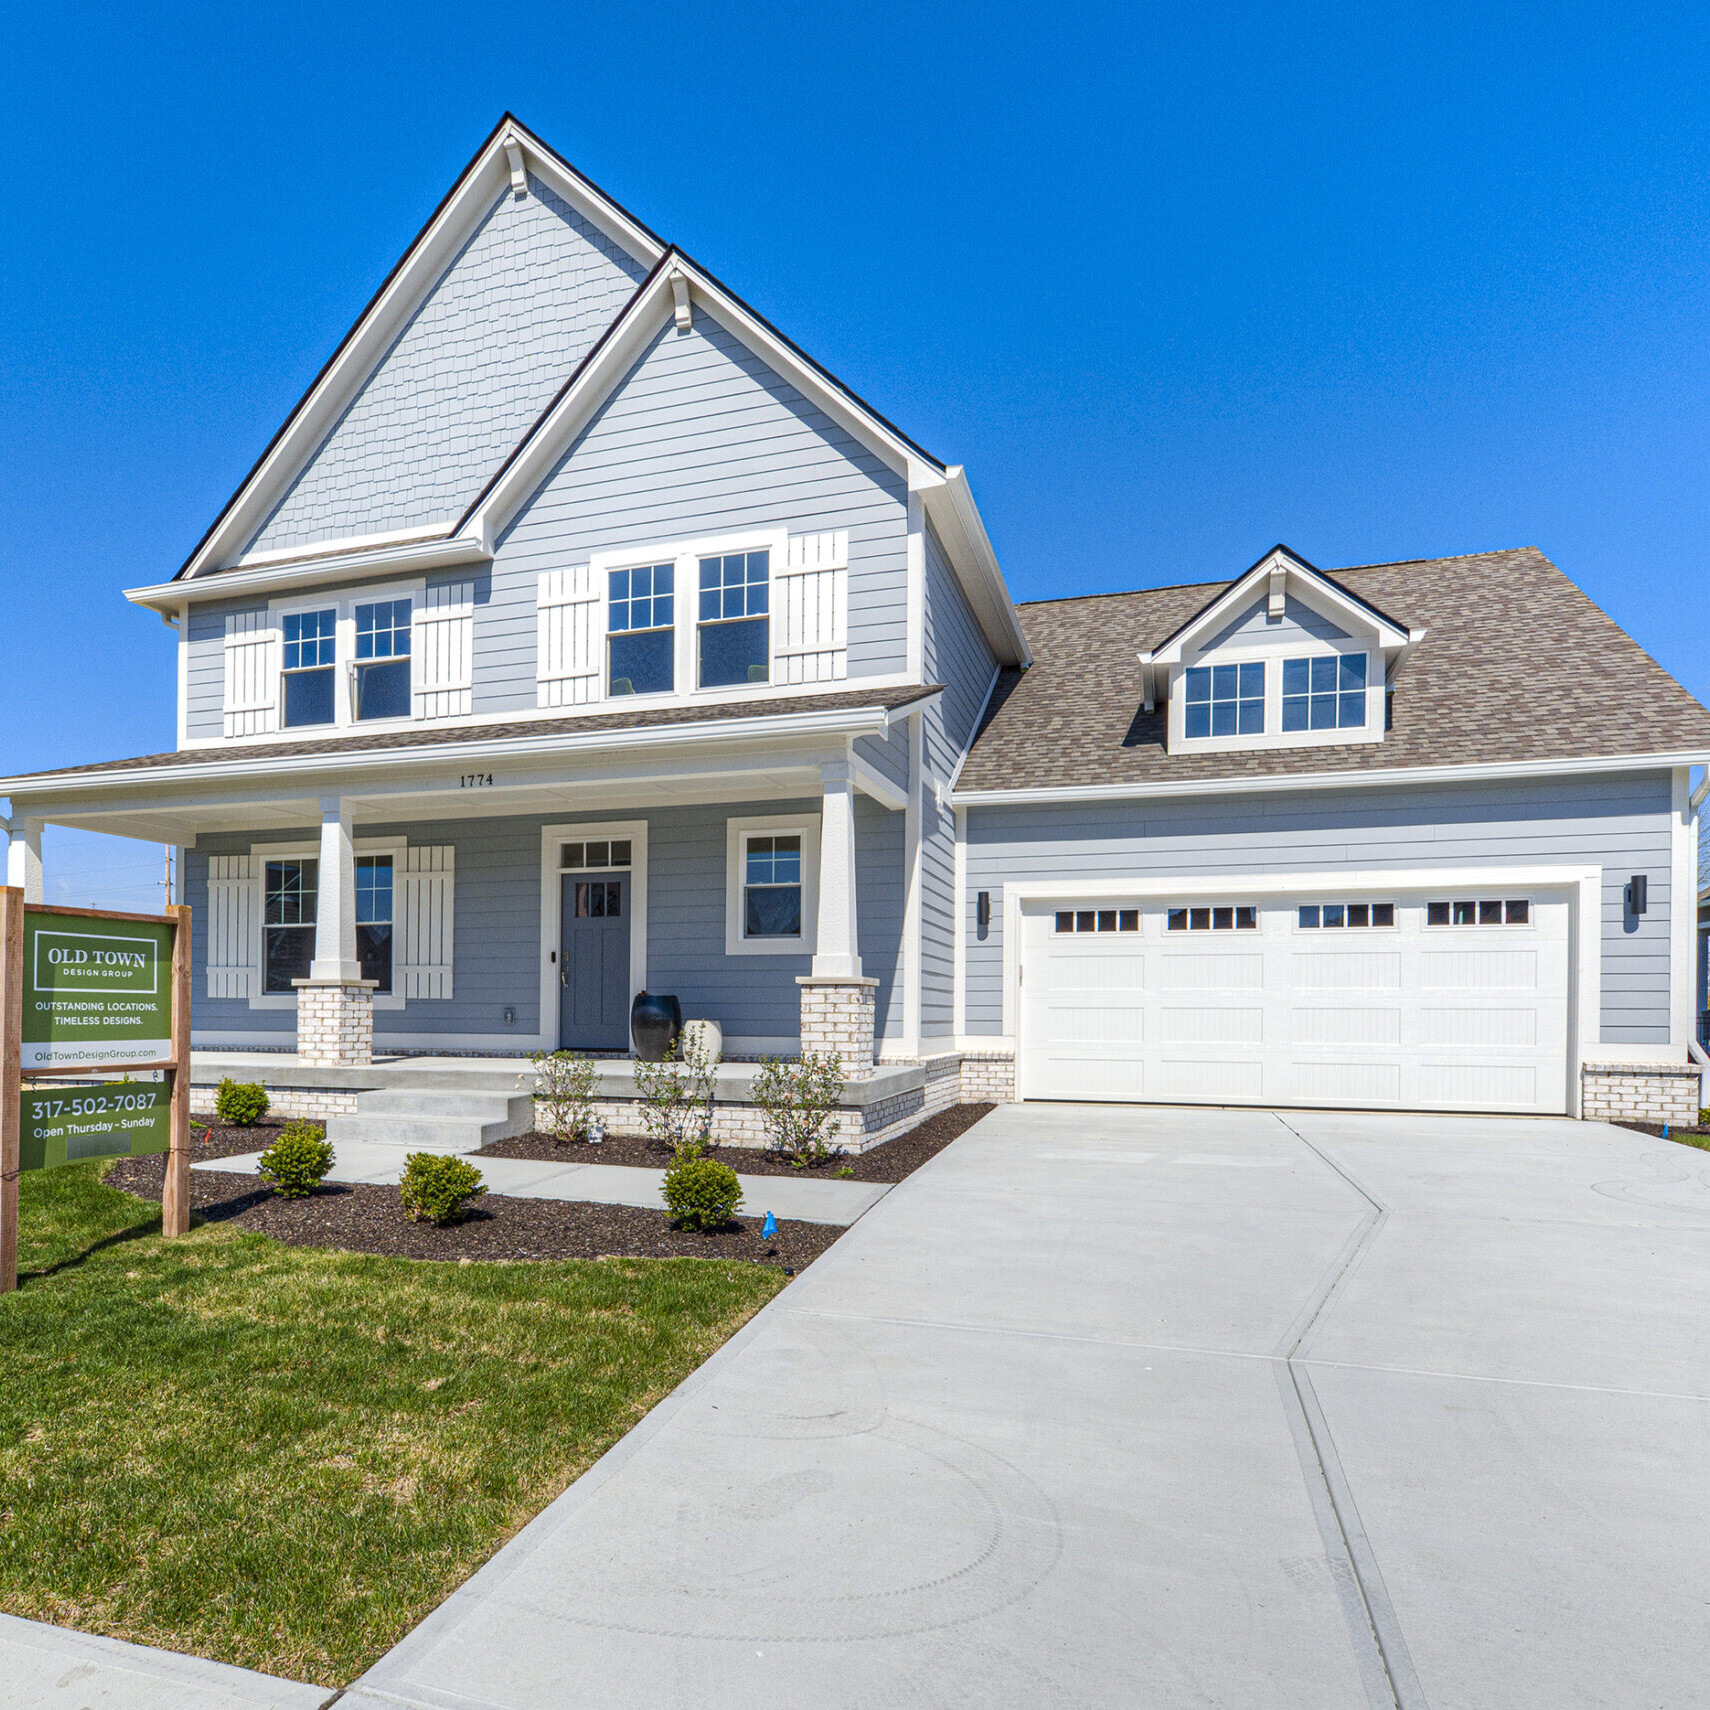 A two story home with a garage and driveway that is custom-built by the New Homes, Custom Home Builder Carmel Indiana.